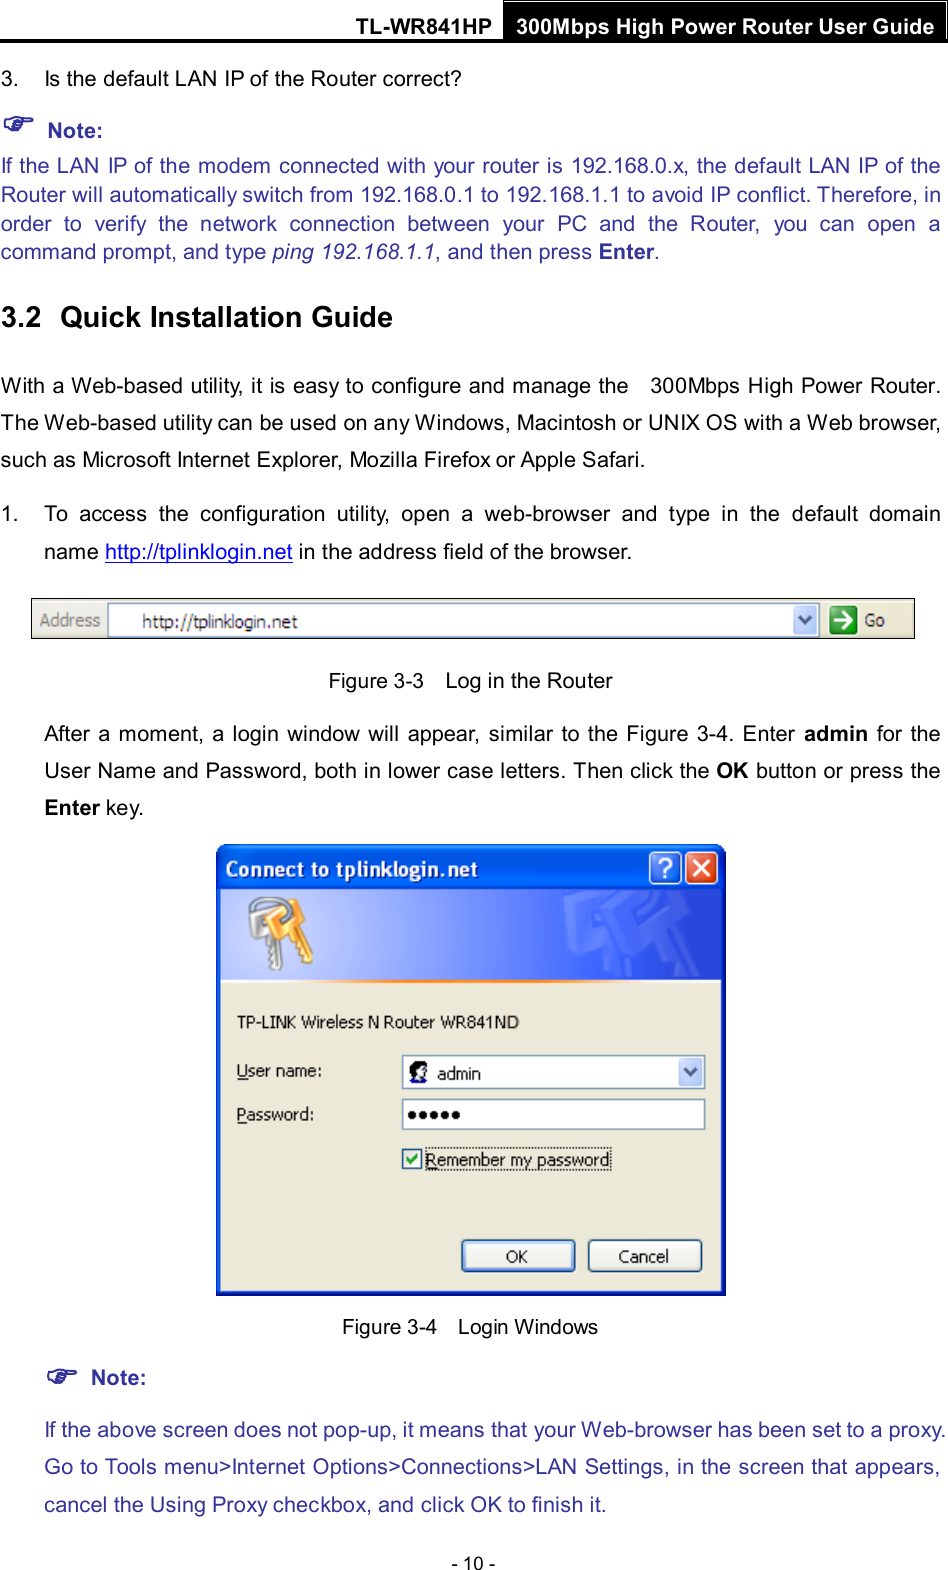 TL-WR841HP 300Mbps High Power Router User Guide  - 10 - 3. Is the default LAN IP of the Router correct?  Note:   If the LAN IP of the modem connected with your router is 192.168.0.x, the default LAN IP of the Router will automatically switch from 192.168.0.1 to 192.168.1.1 to avoid IP conflict. Therefore, in order to verify the network connection between your PC and the Router,  you can open a command prompt, and type ping 192.168.1.1, and then press Enter. 3.2 Quick Installation Guide With a Web-based utility, it is easy to configure and manage the   300Mbps High Power Router. The Web-based utility can be used on any Windows, Macintosh or UNIX OS with a Web browser, such as Microsoft Internet Explorer, Mozilla Firefox or Apple Safari. 1. To access the configuration utility, open a web-browser and type in the default domain name http://tplinklogin.net in the address field of the browser.  Figure 3-3  Log in the Router After a moment, a login window will appear,  similar to the Figure  3-4. Enter admin for the User Name and Password, both in lower case letters. Then click the OK button or press the Enter ke y.   Figure 3-4  Login Windows  Note: If the above screen does not pop-up, it means that your Web-browser has been set to a proxy. Go to Tools menu&gt;Internet Options&gt;Connections&gt;LAN Settings, in the screen that appears, cancel the Using Proxy checkbox, and click OK to finish it. 